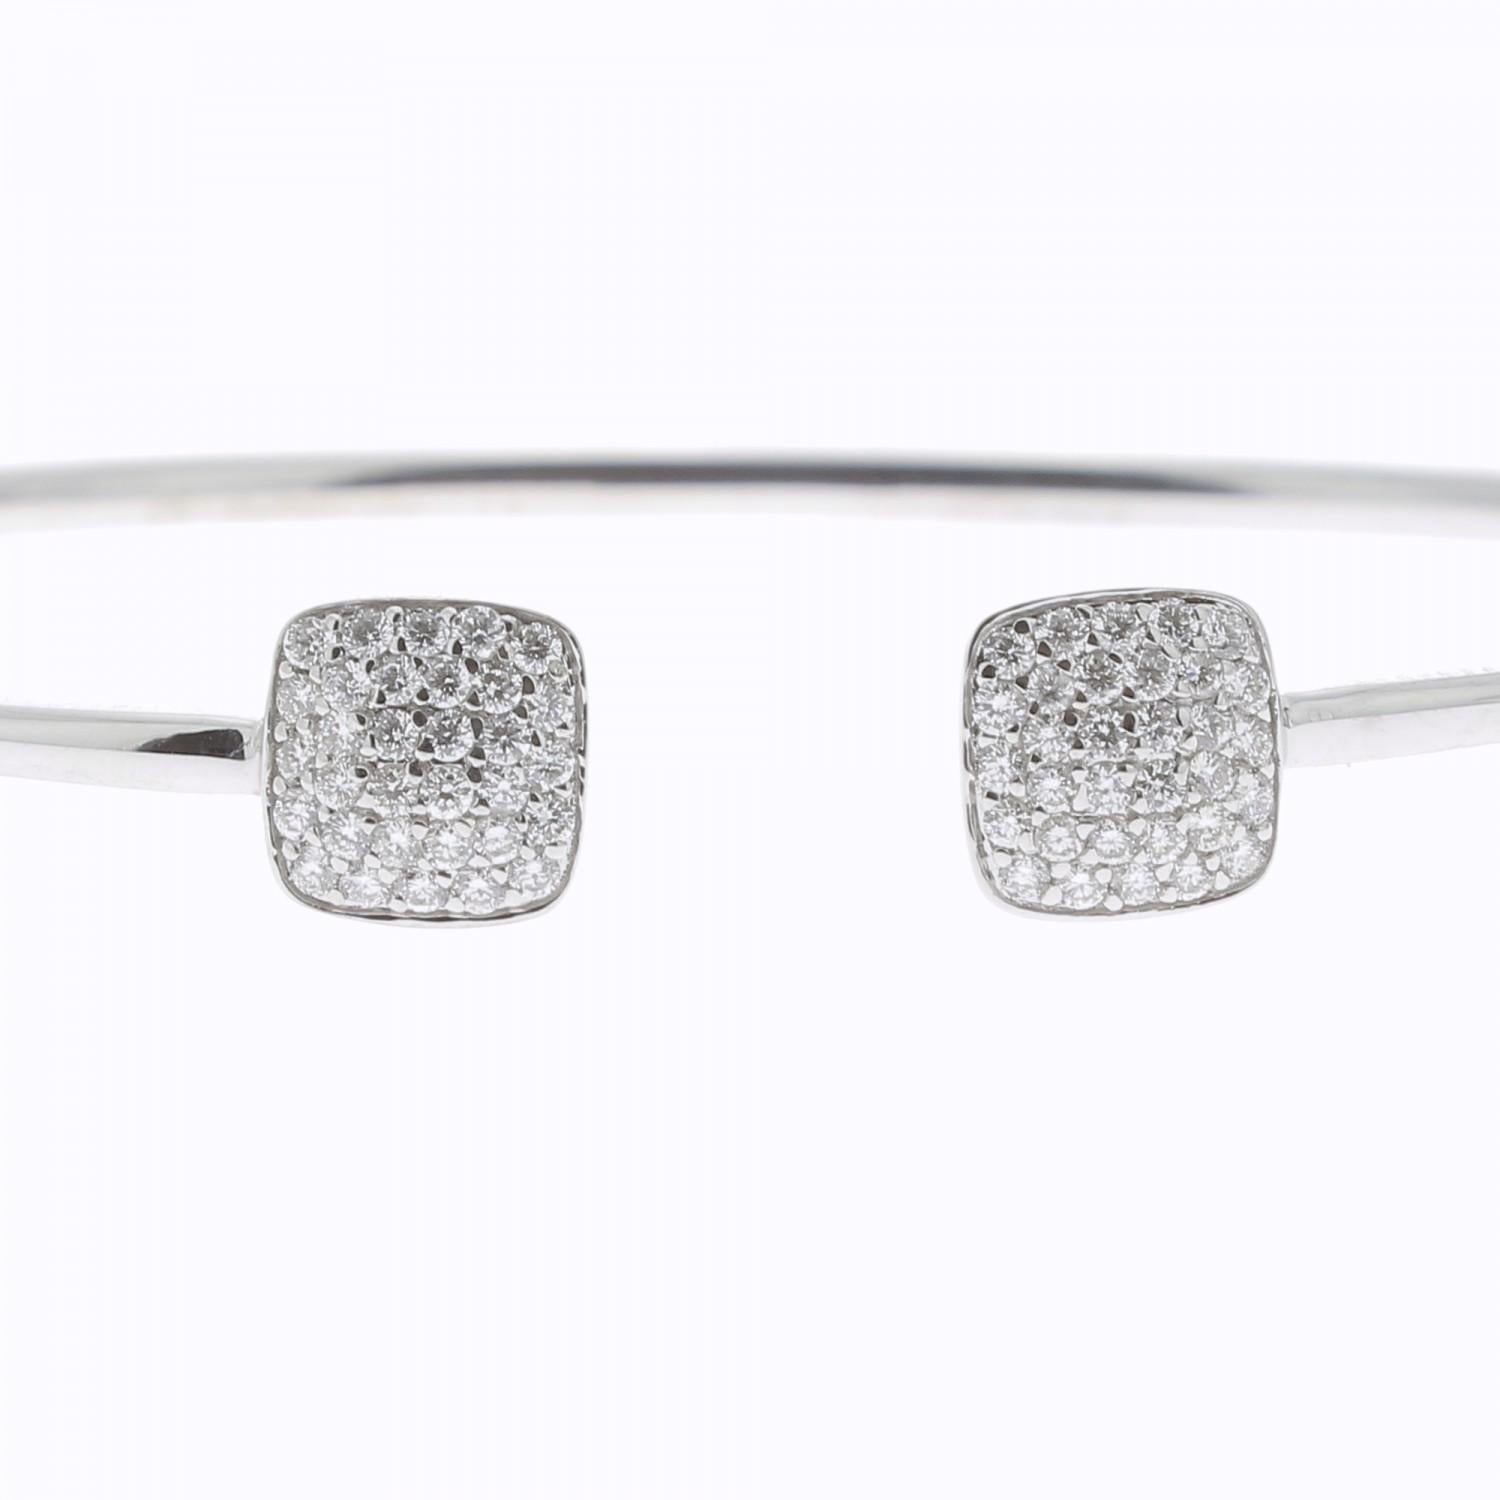 Beautiful And Modern Cuff  Bracelet.
The Cuff Bracelet is set with 0.36 Carats of Round Diamonds.
The Diamond are GVS quality and the Bracelet is in 18K White Gold.
The Bracelet size is 5.5 cm.
The Bracelet is also available in 18K Rose Gold and 18K